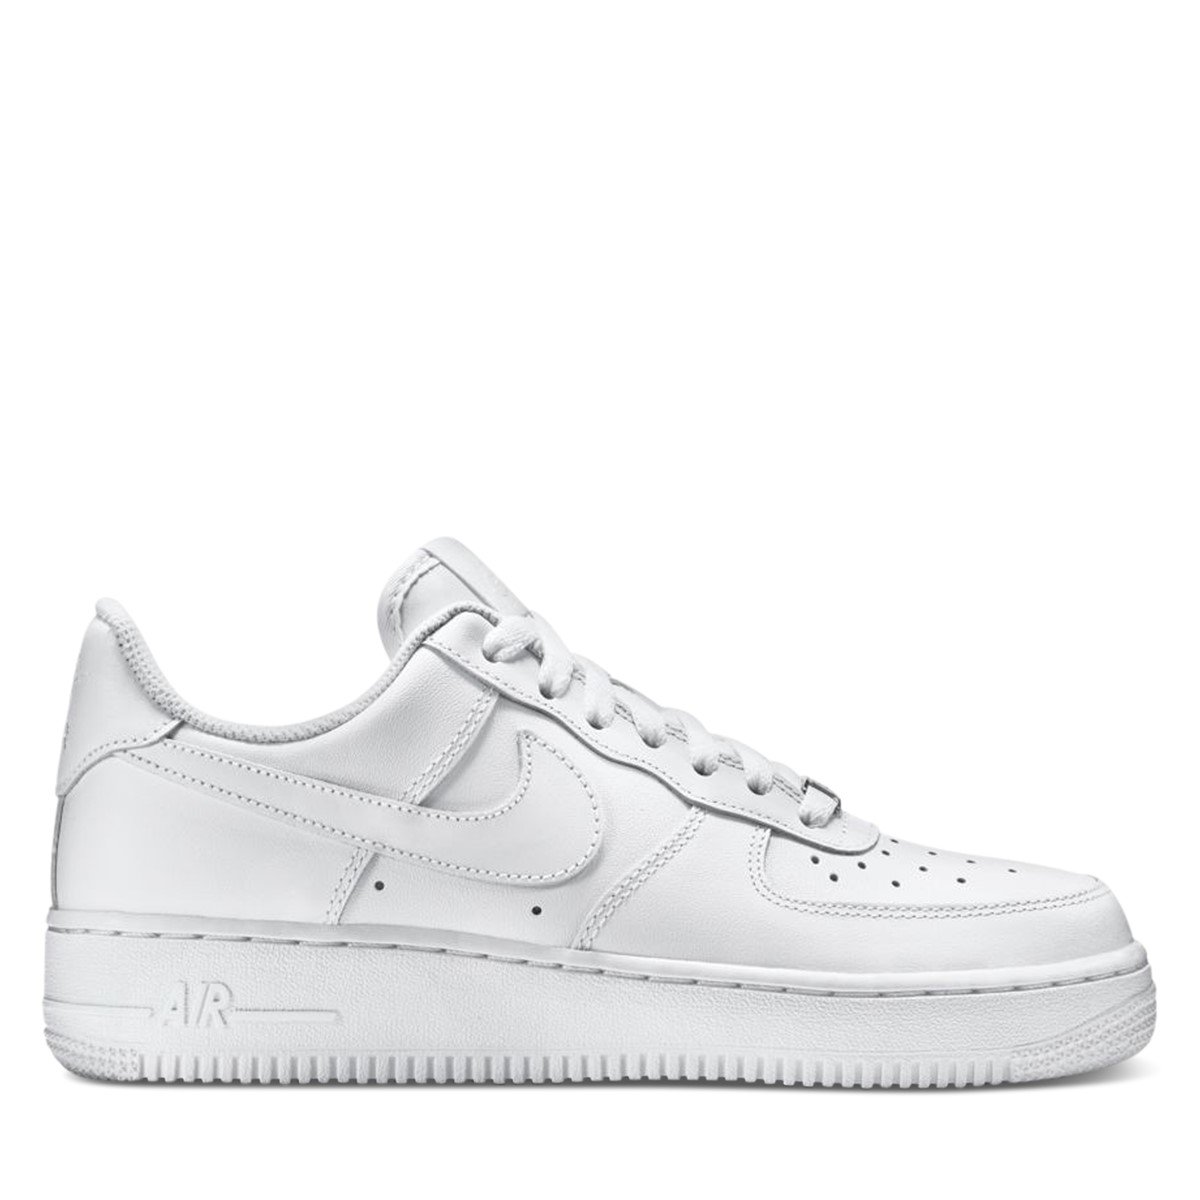 appear Excrete Reductor Women's Air Force 1 '07 Sneakers in White | Little Burgundy